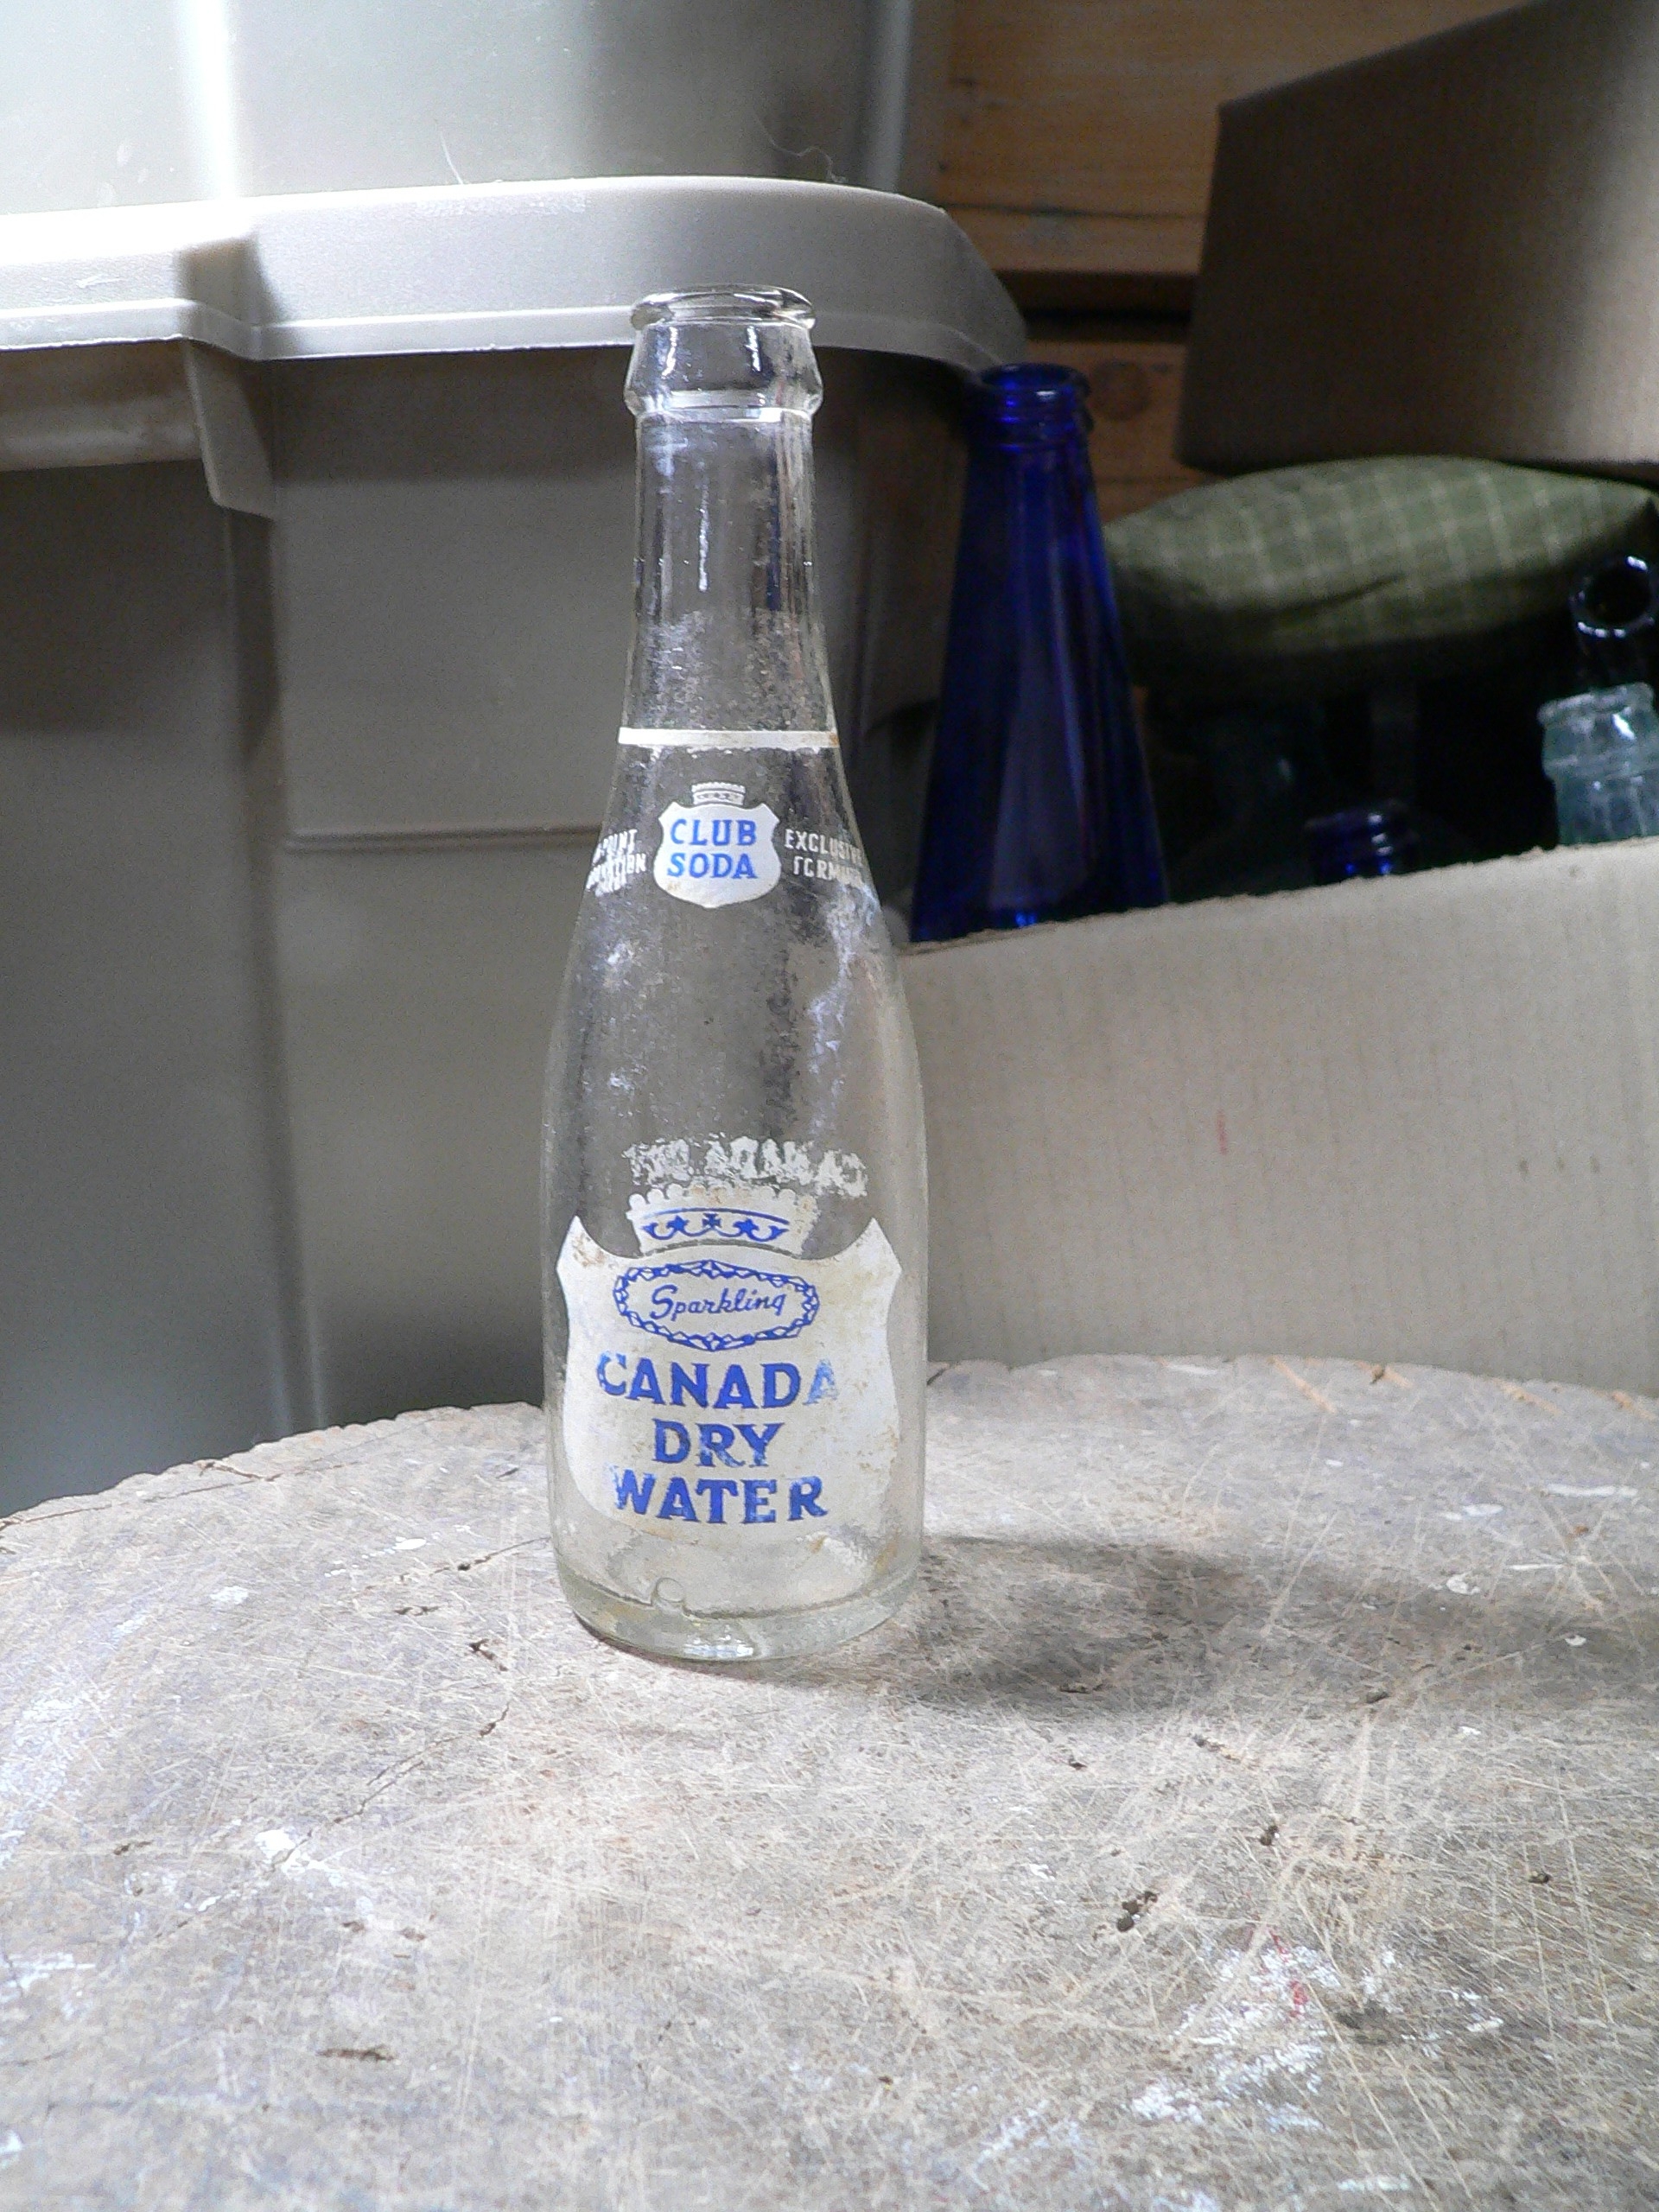 Bouteille vintage canada dry water # 8787.3